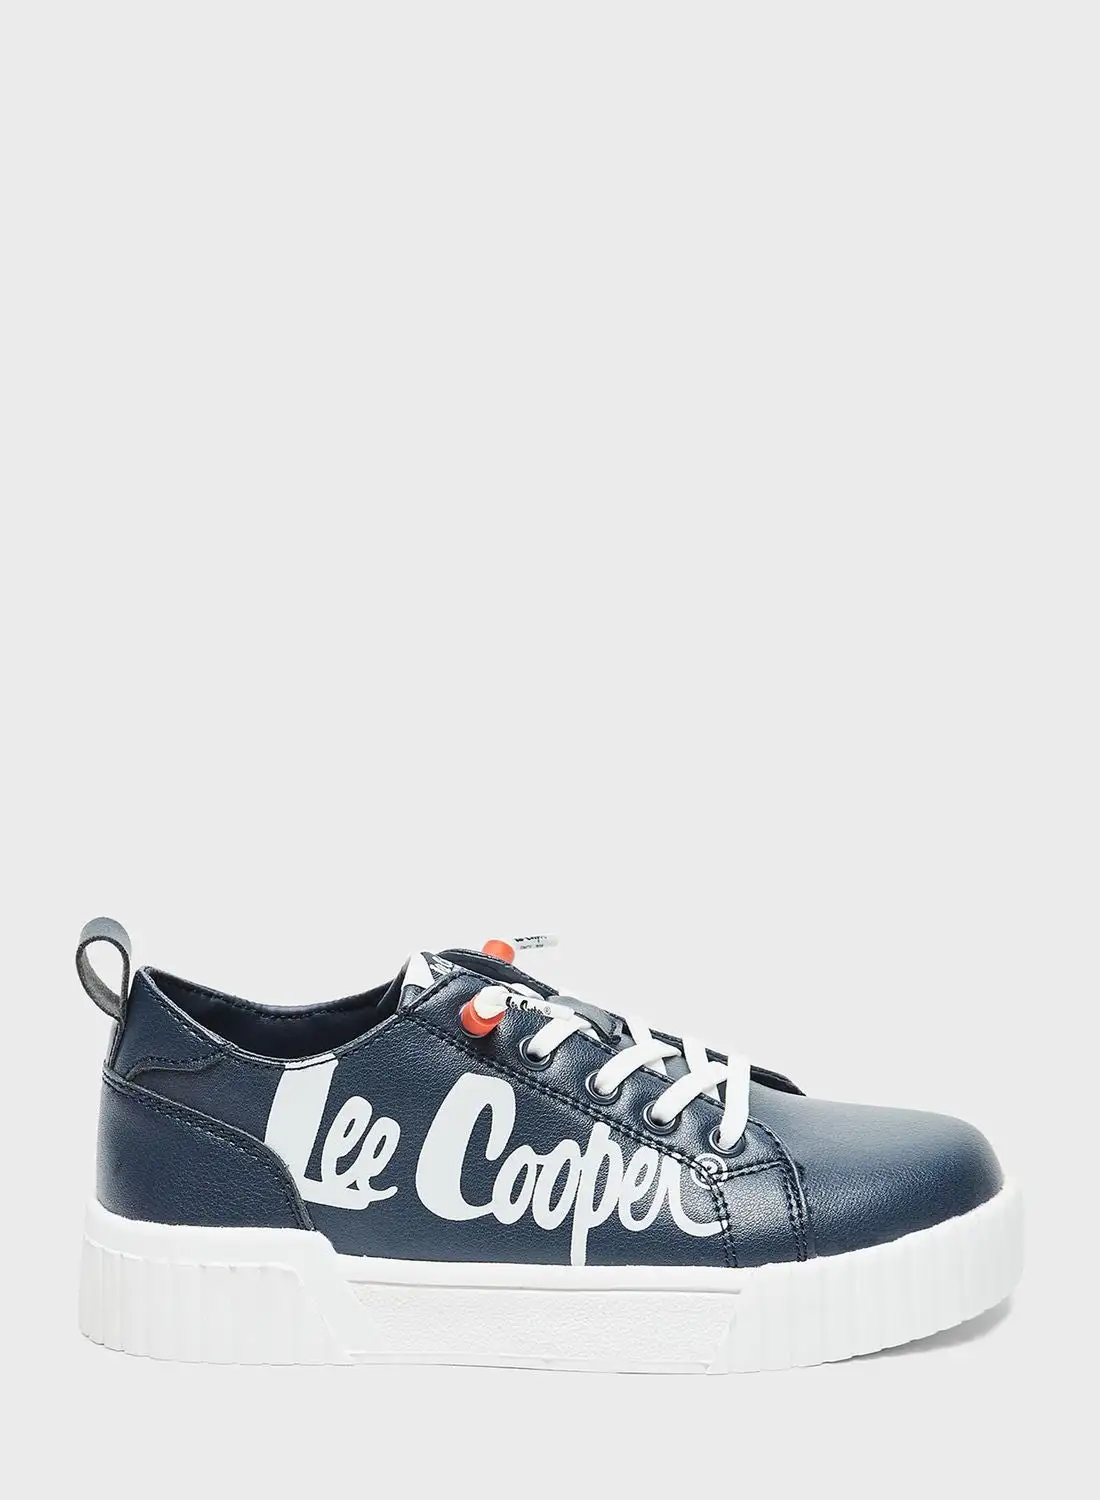 Lee Cooper Kids Lace Up Low Top Sneakers